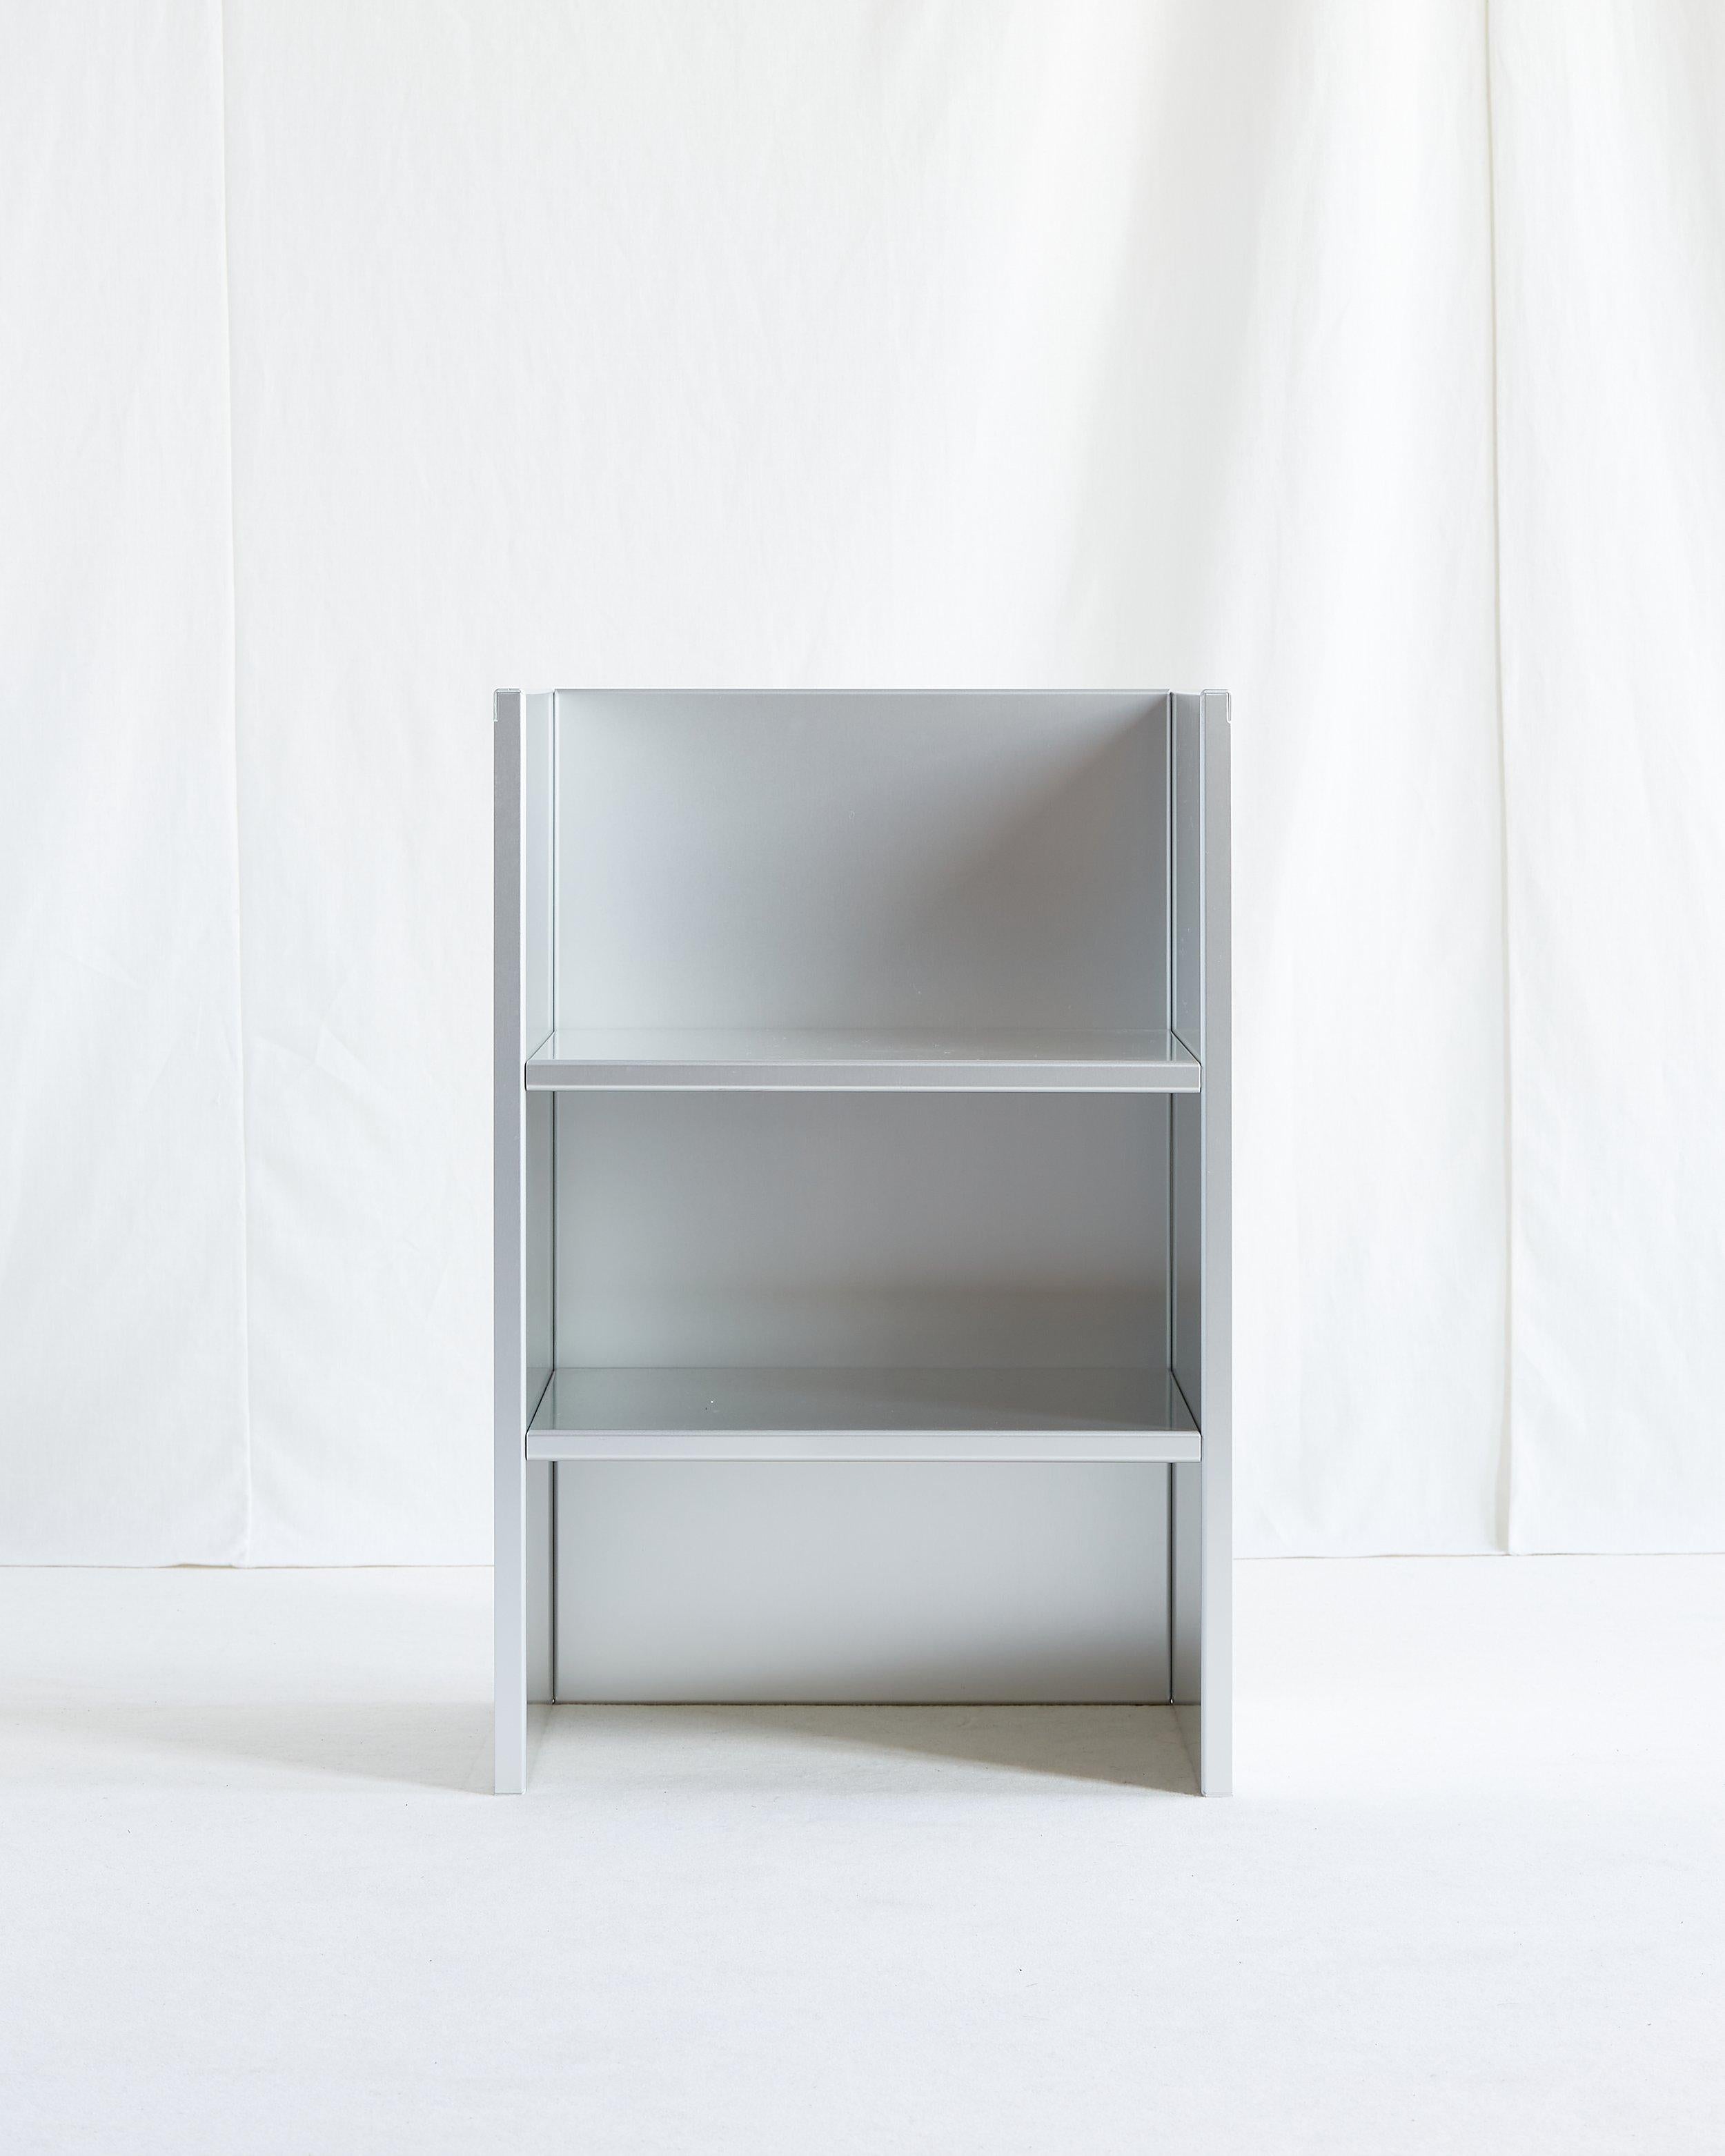 Donald Judd Armchair, Model no. 1.

Clear anodized aluminum.

Designed 1984, executed 2013. Produced by Lehni, Dübendorf, Switzerland.

Impressed 'Donald Judd TM/Swiss made by Lehni'.

Numbered 1/108 and dated 2013.

Provenance: Judd Foundation, New